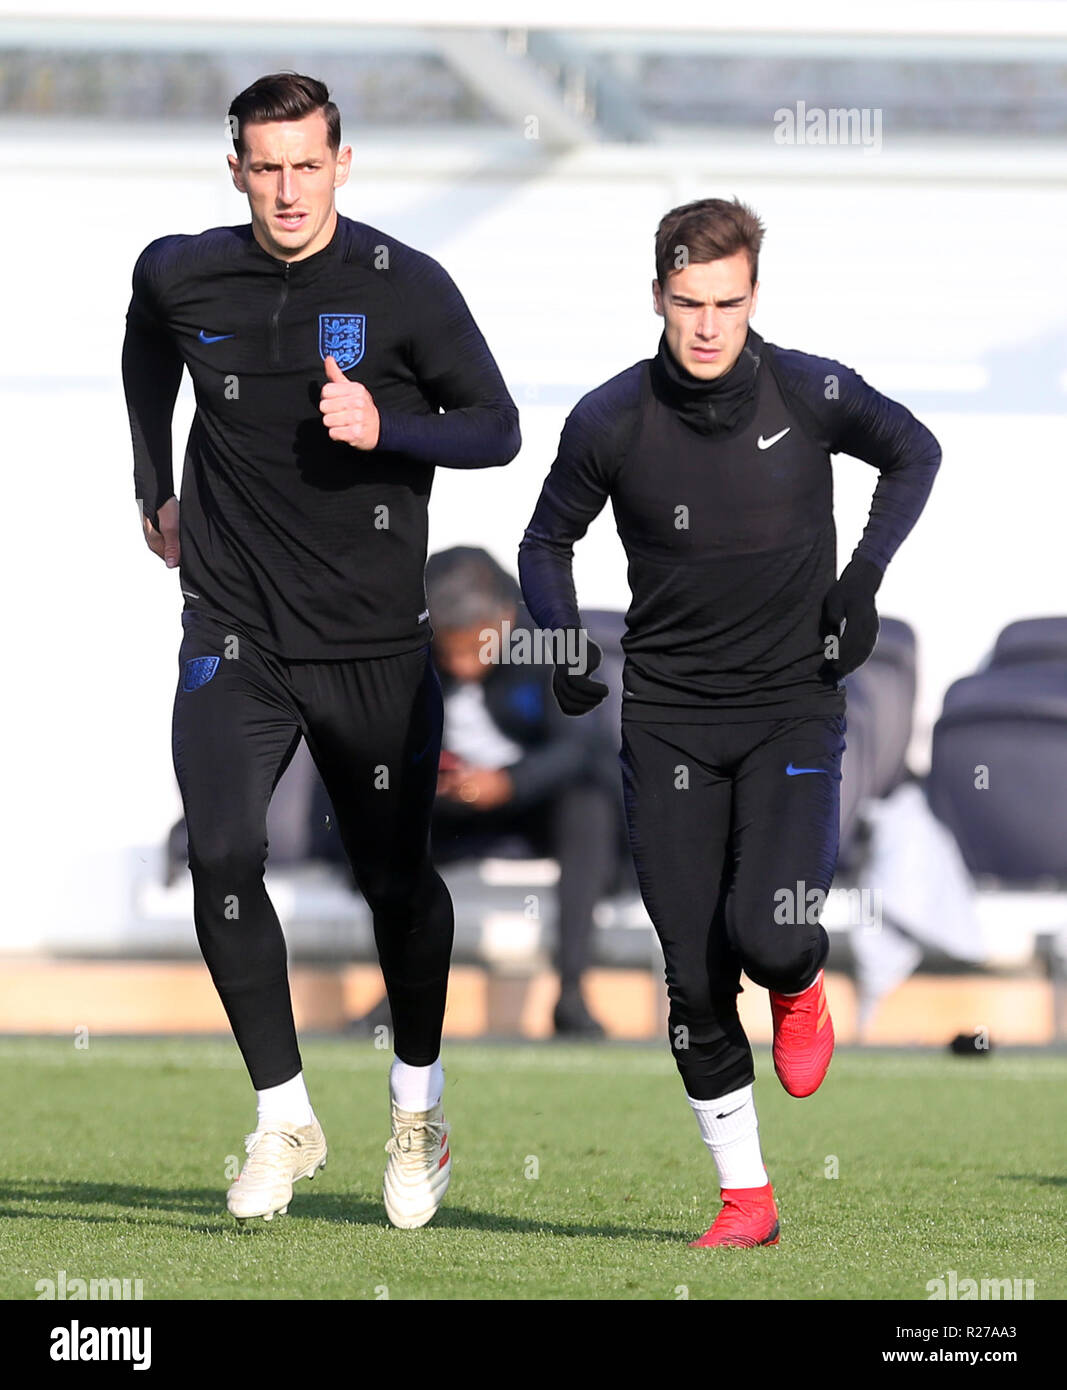 England's Lewis Dunk (left) and Harry Winks during the training session at Enfield Training Ground, London. PRESS ASSOCIATION Photo. Picture date: Saturday November 17, 2018. See PA story SOCCER England. Photo credit should read: Steven Paston/PA Wire. Stock Photo